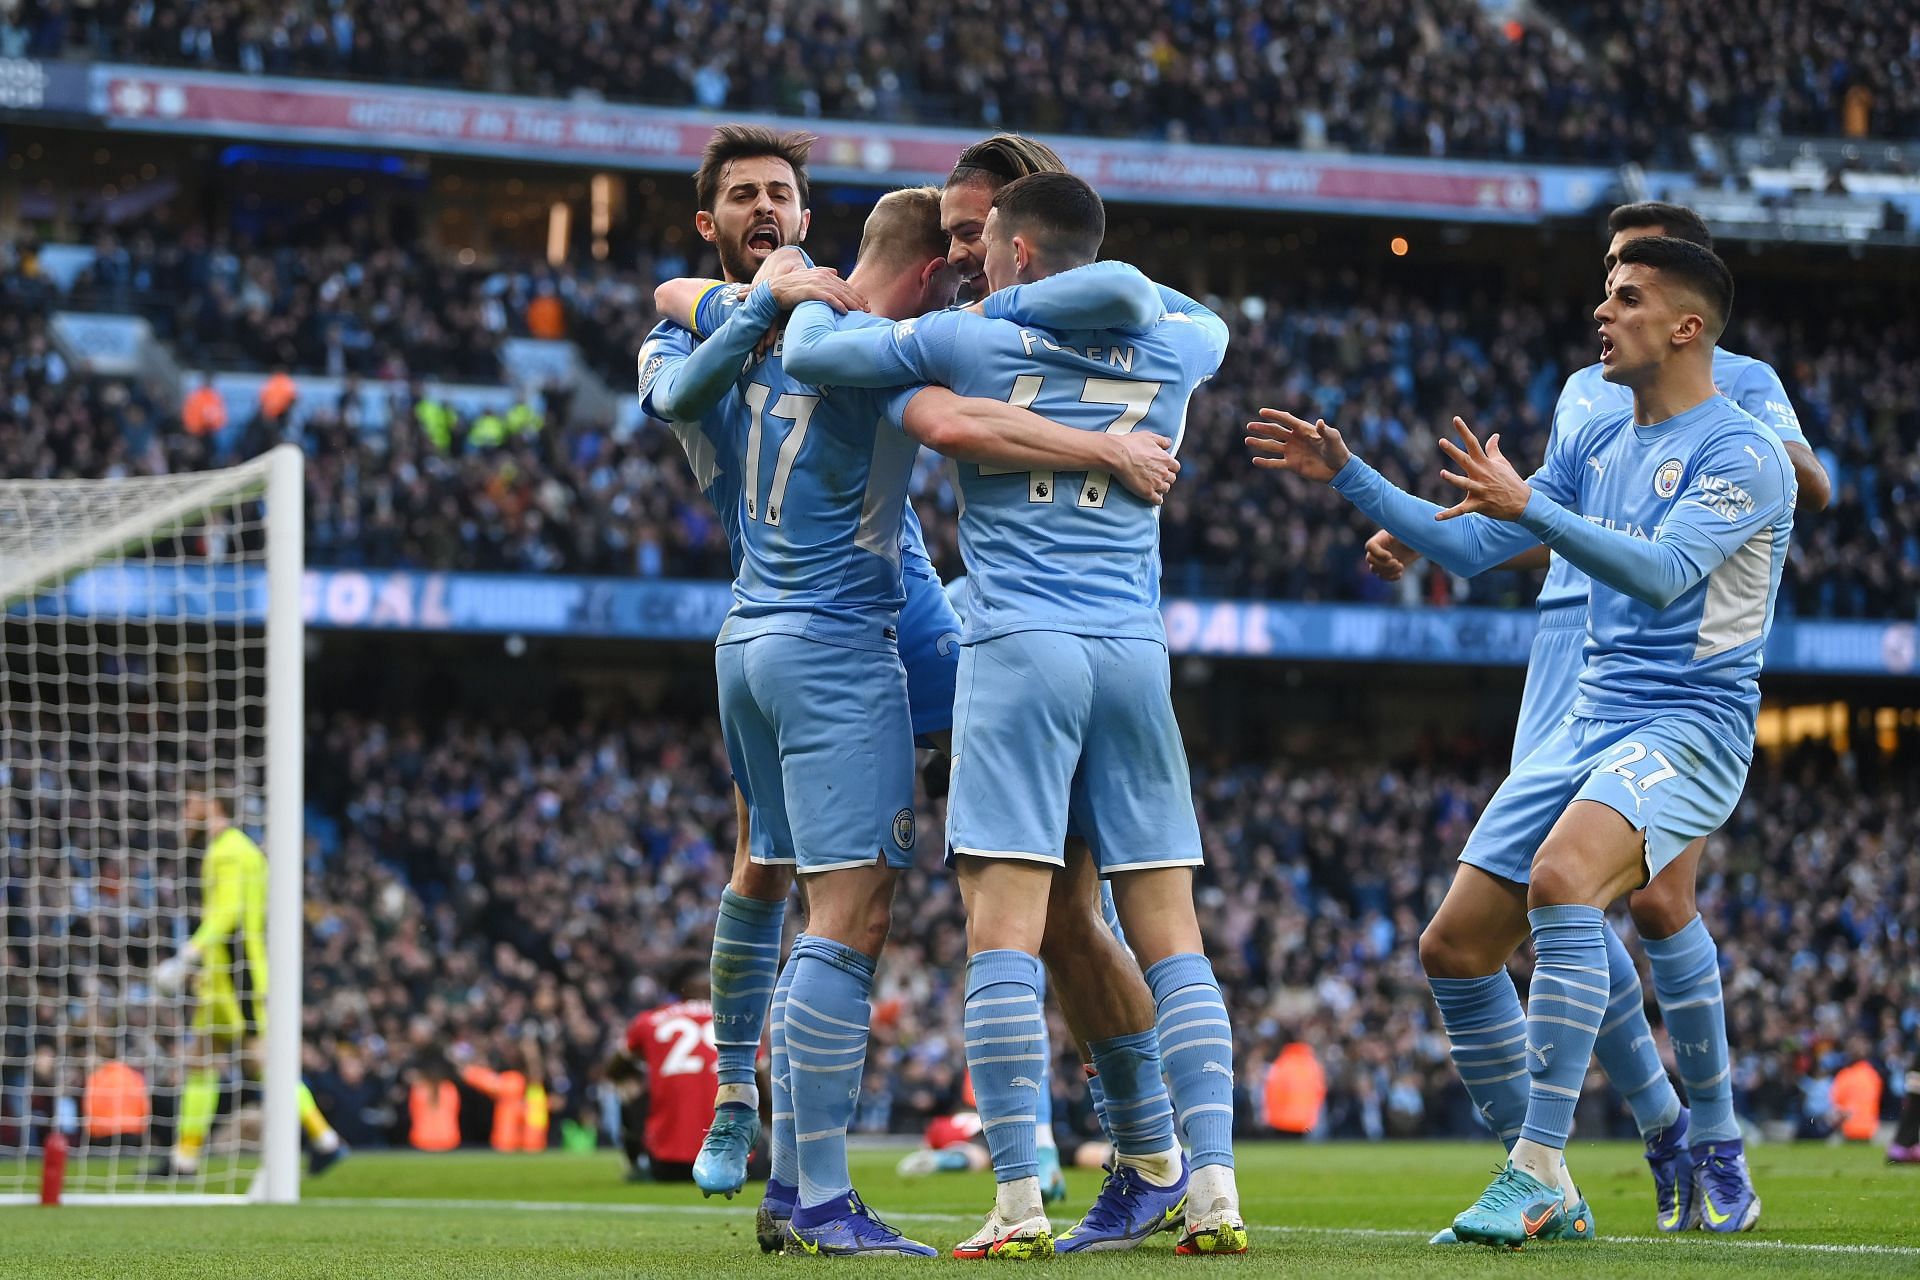 Manchester City know how to keep their performance going at the business end of the season